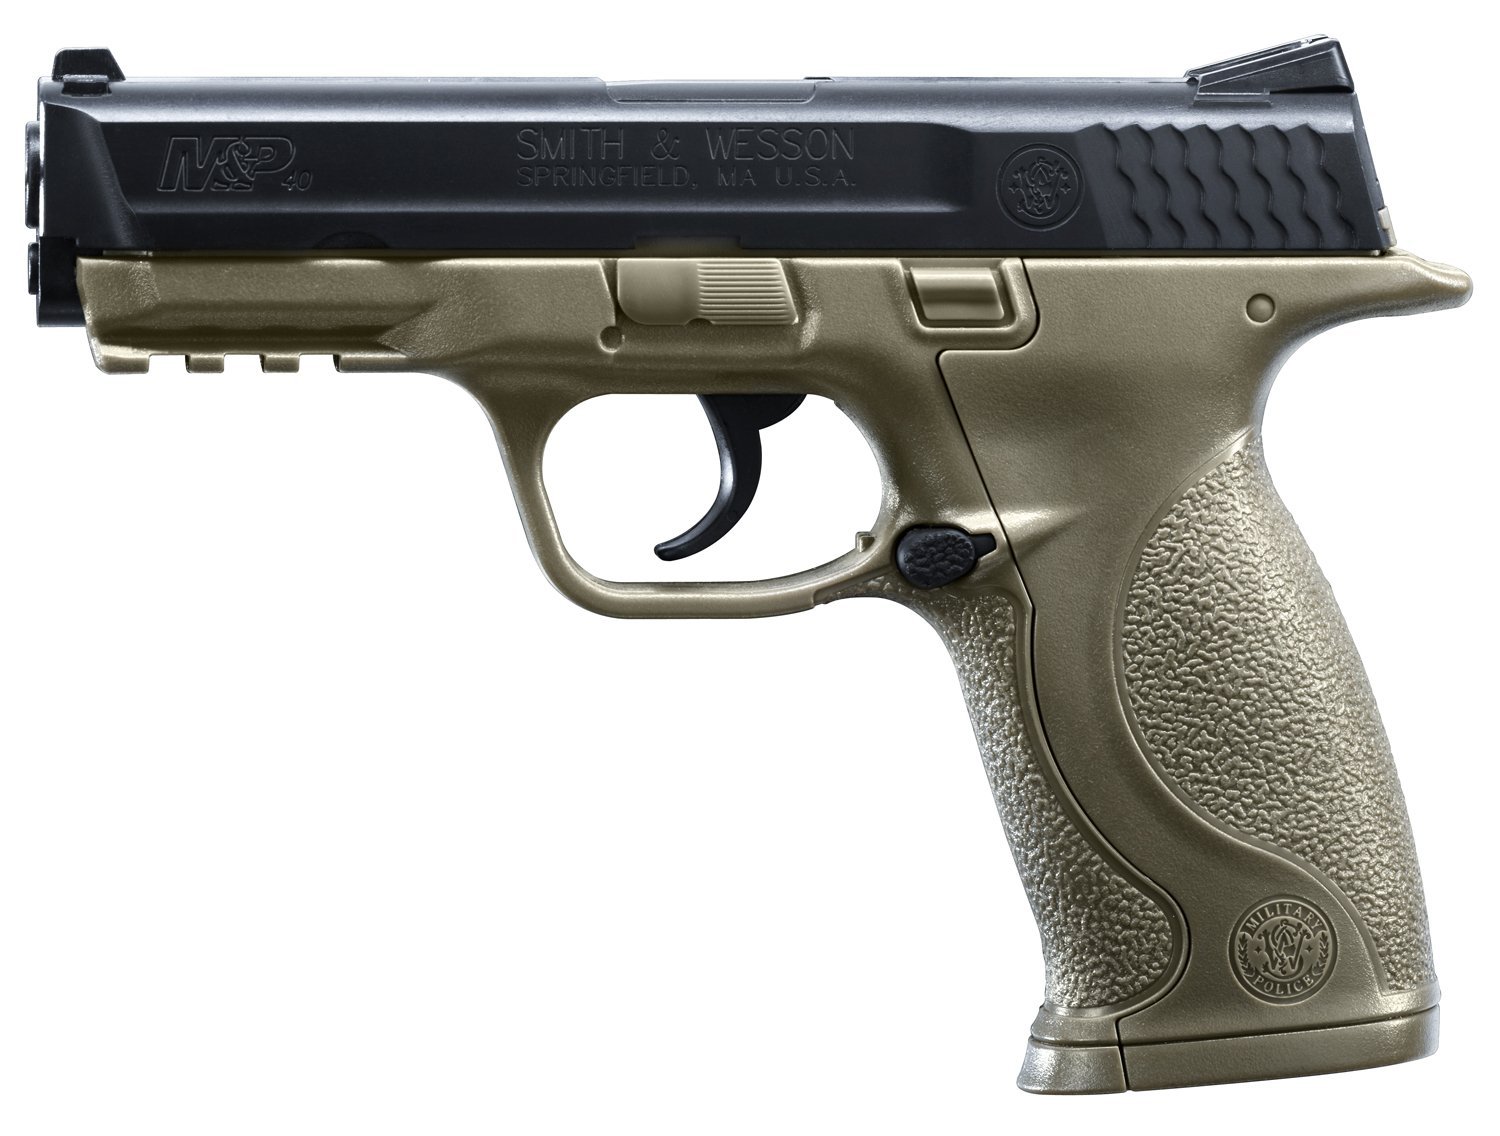 Smith & Wesson Pistol #29